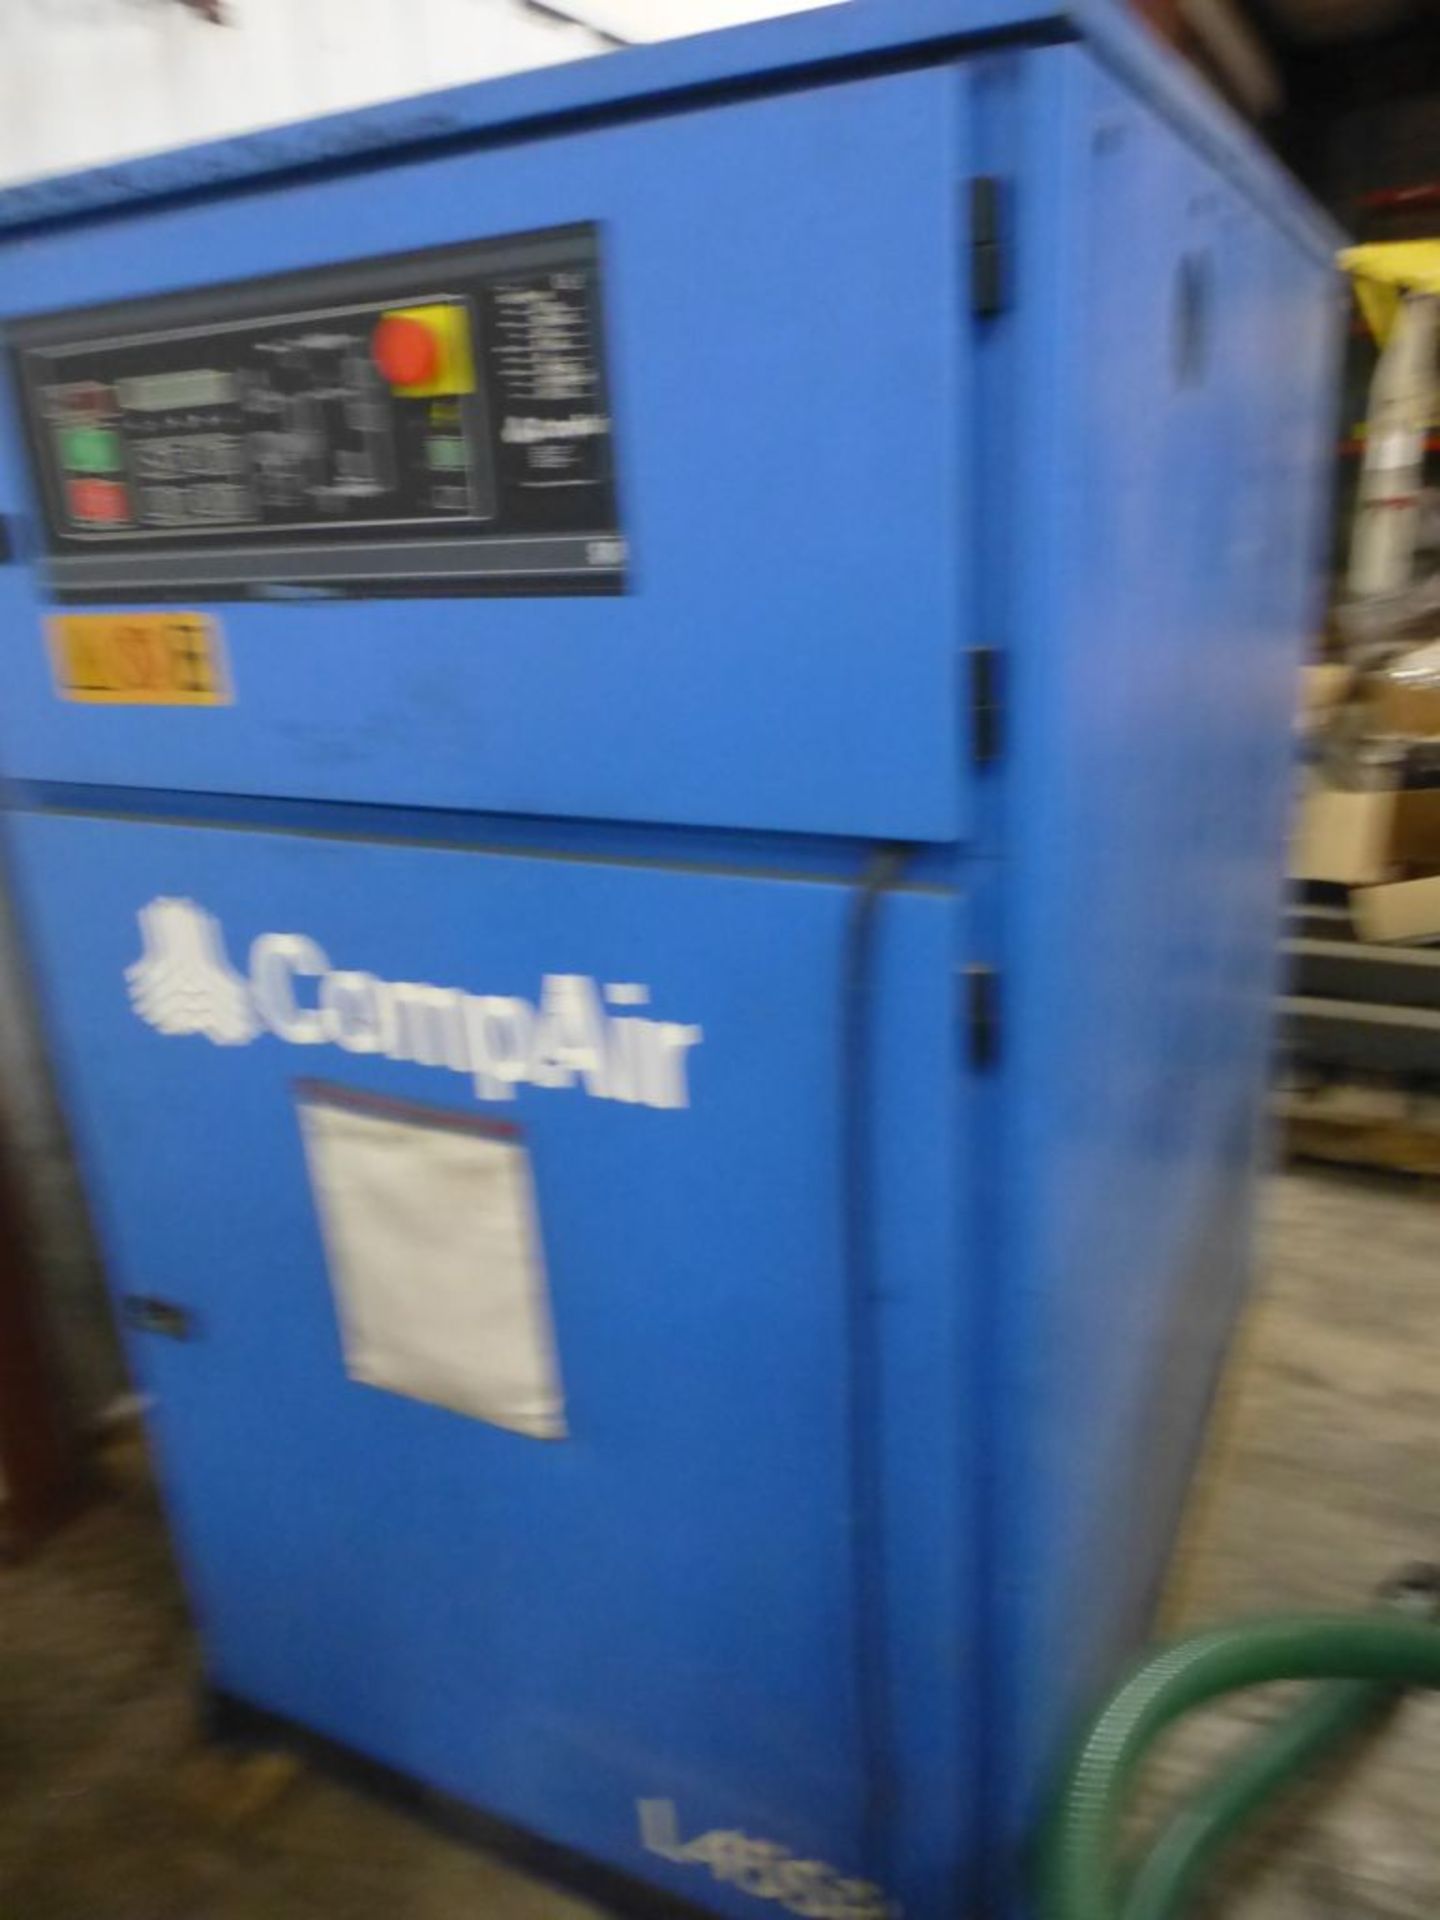 2002 Compair LH5SR 67 HP Speed Regulated Rotary Screw Air Compressor | Model No. LH5SR; 13 Bar - Image 3 of 8